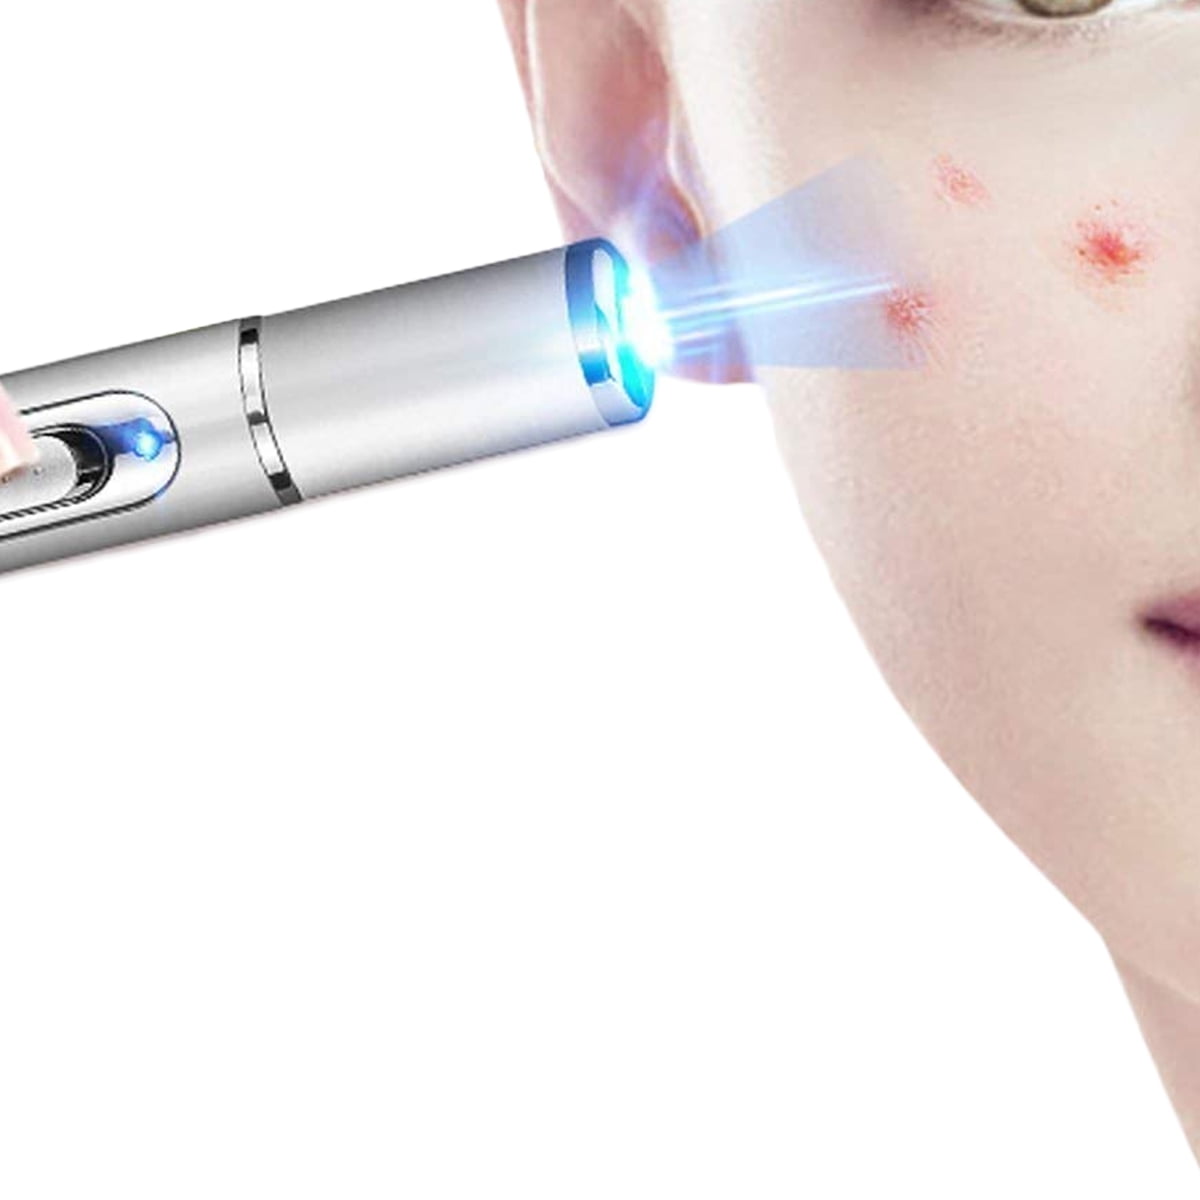 RUEWEY Medical Blue Light Therapy Laser Treatment Pen Acne Skin Care Device